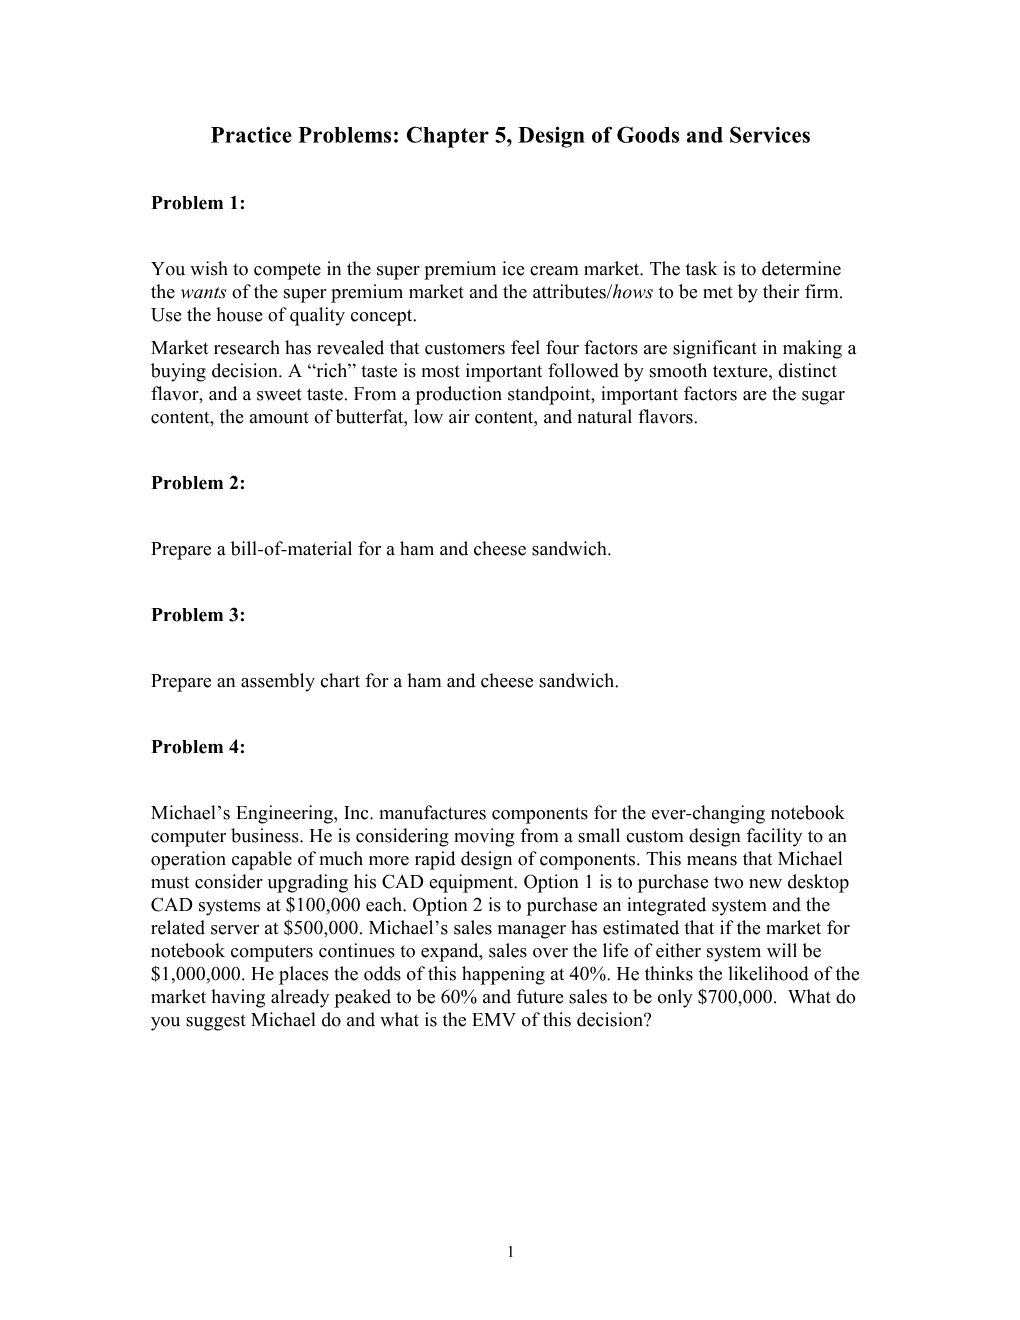 Practice Problems: Chapter 5, Design of Goods and Services